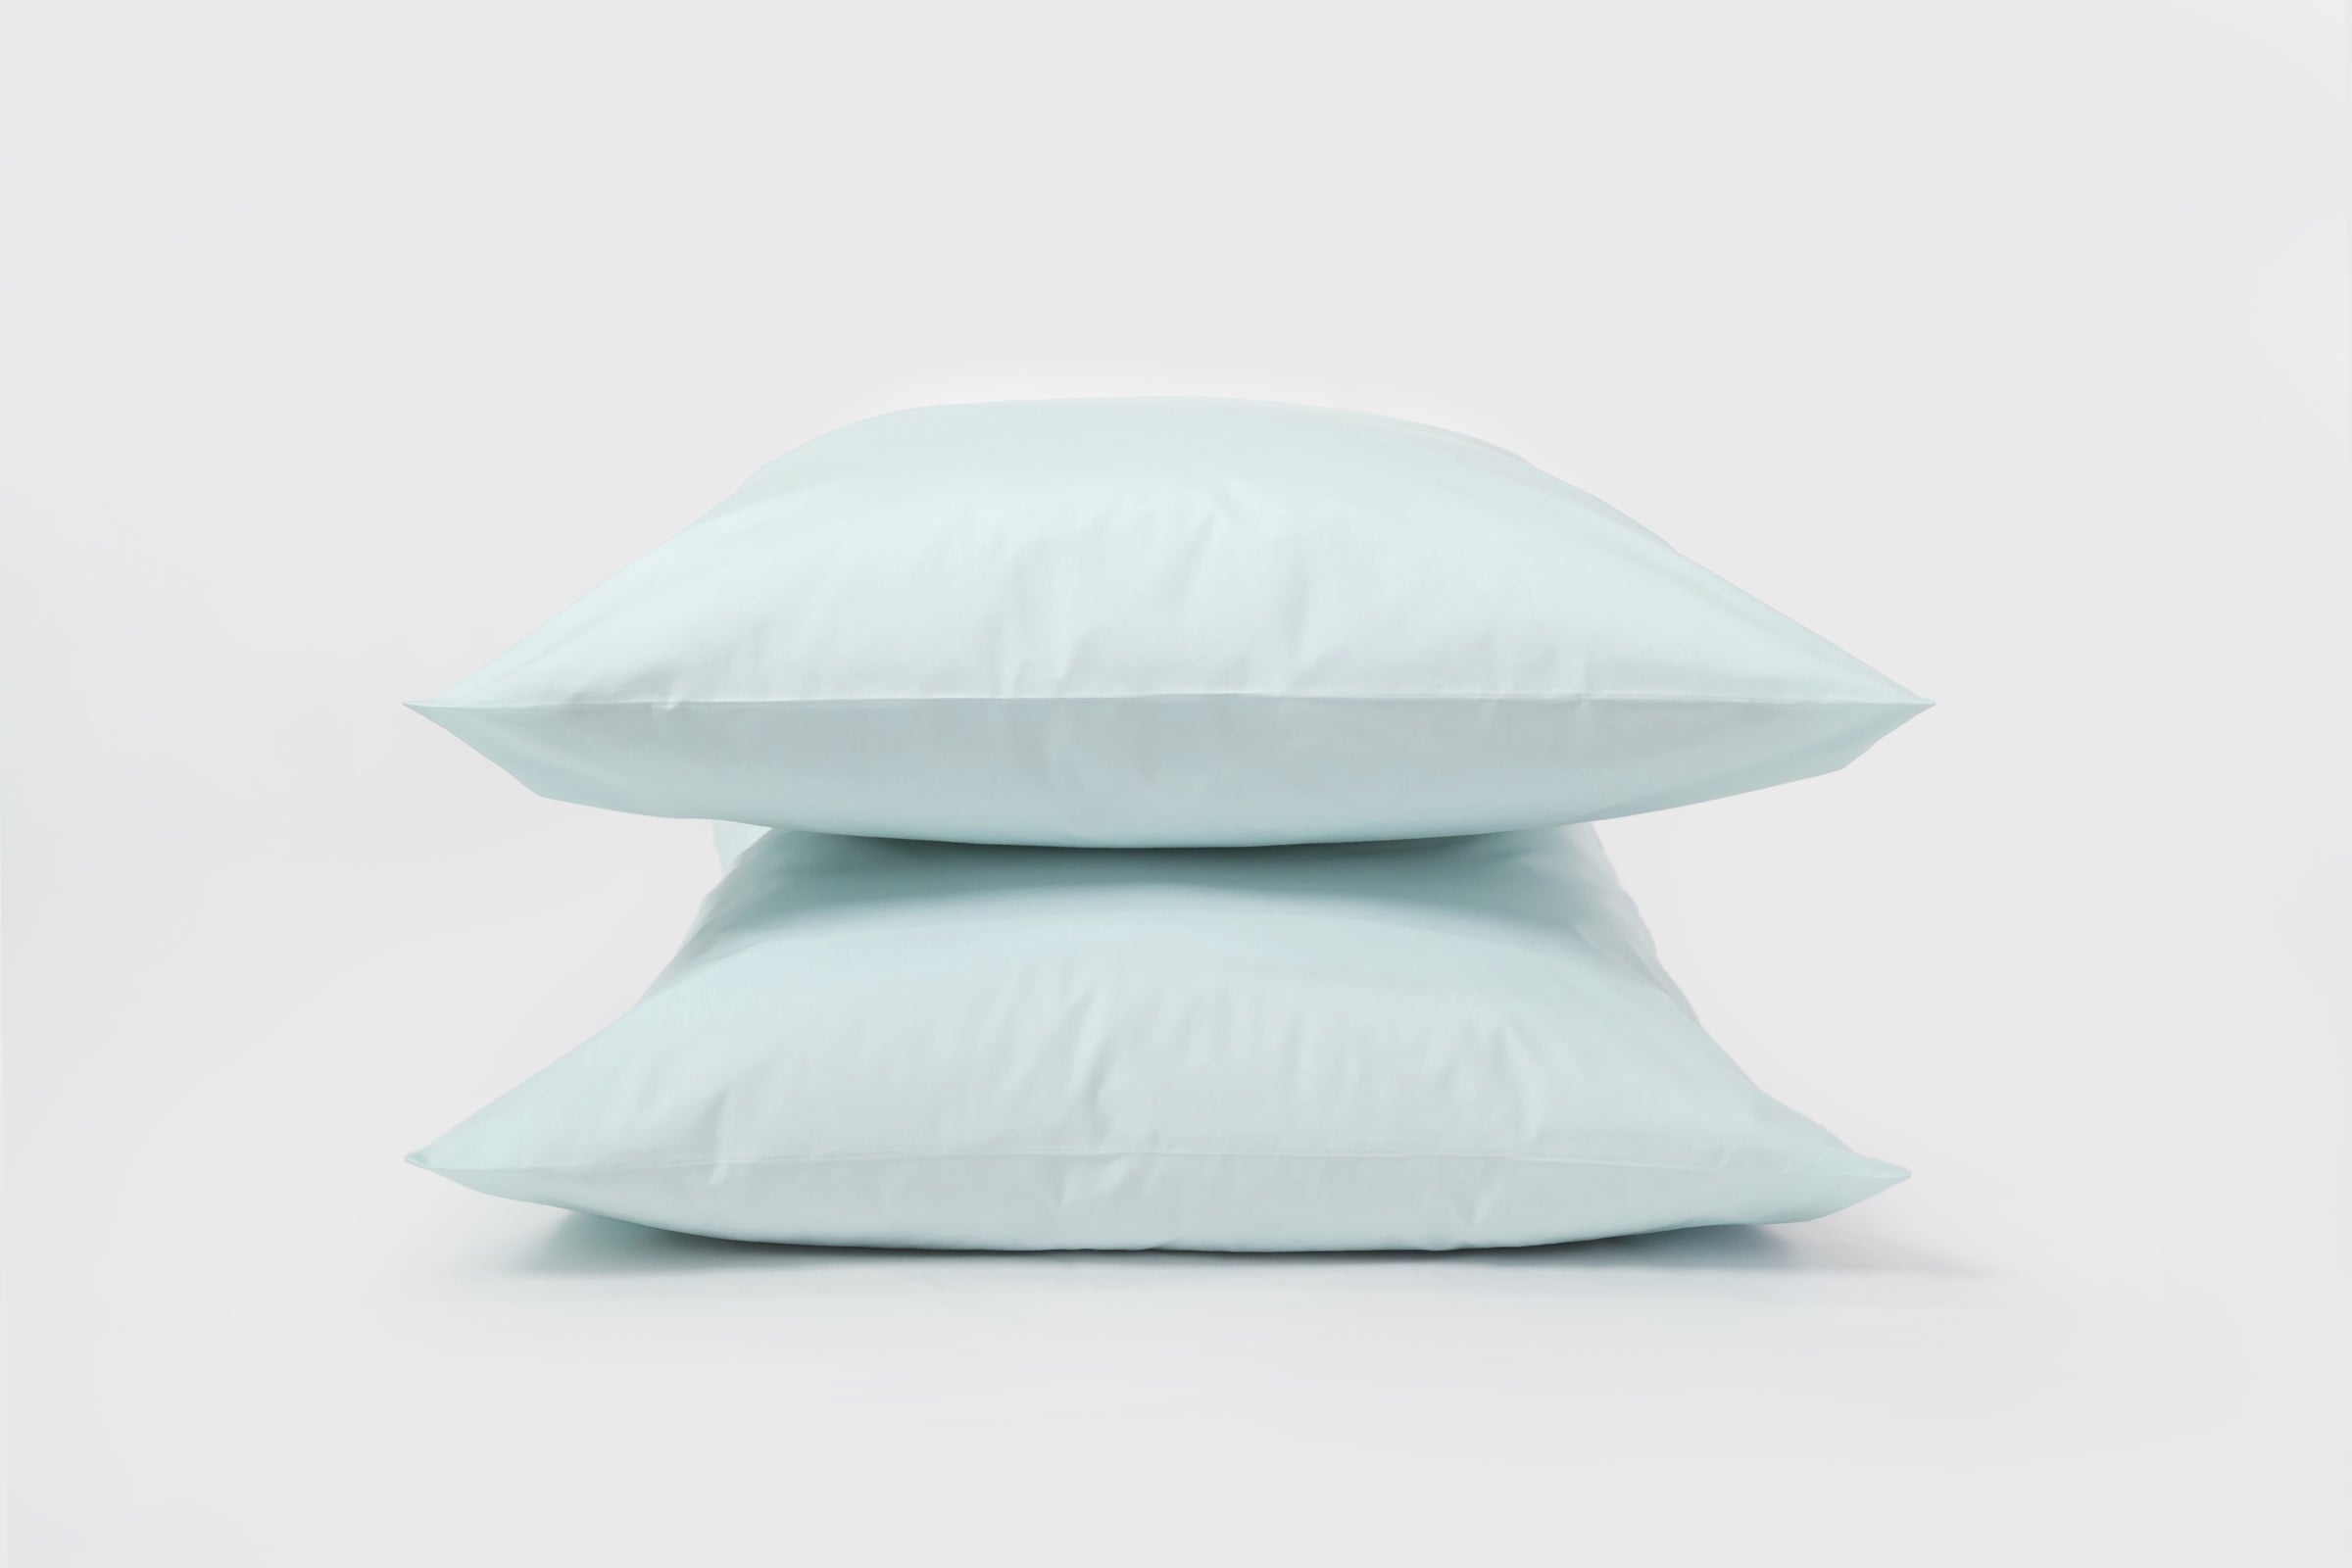 classic-mint-pillowcase-pair-product-shot-by-sojao.jpg